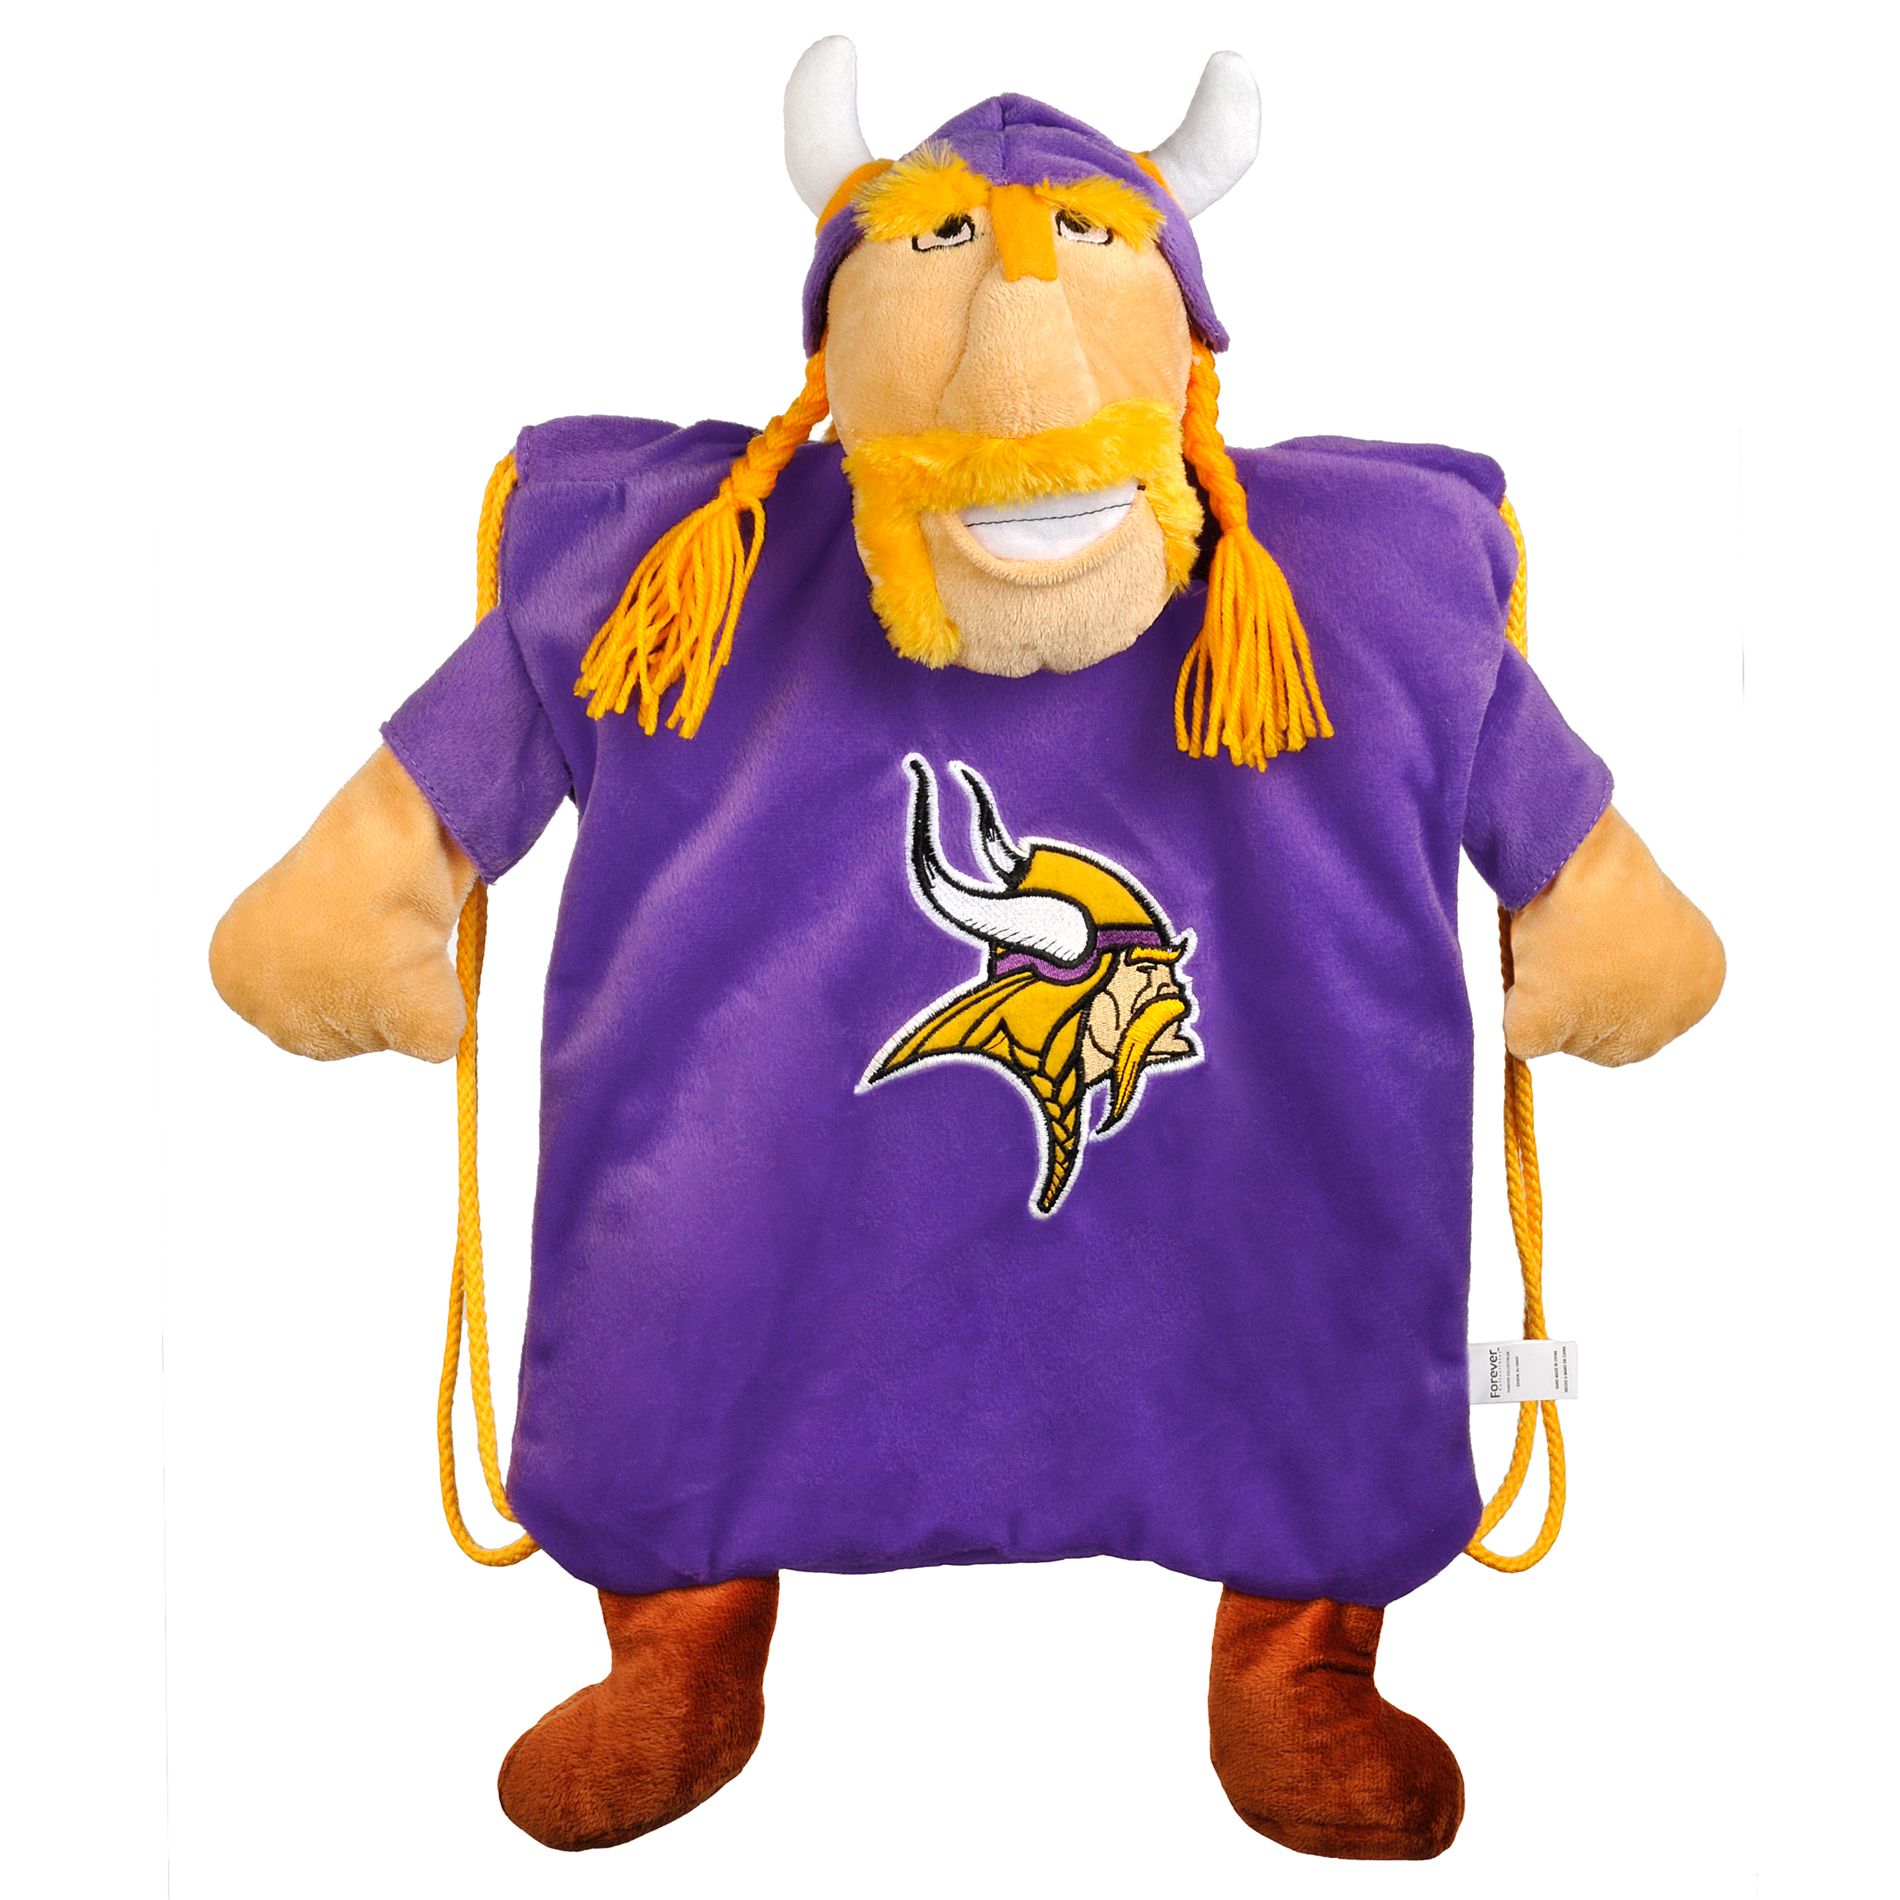 Forever Collectibles NFL Backpack Pal - Minnesota Vikings